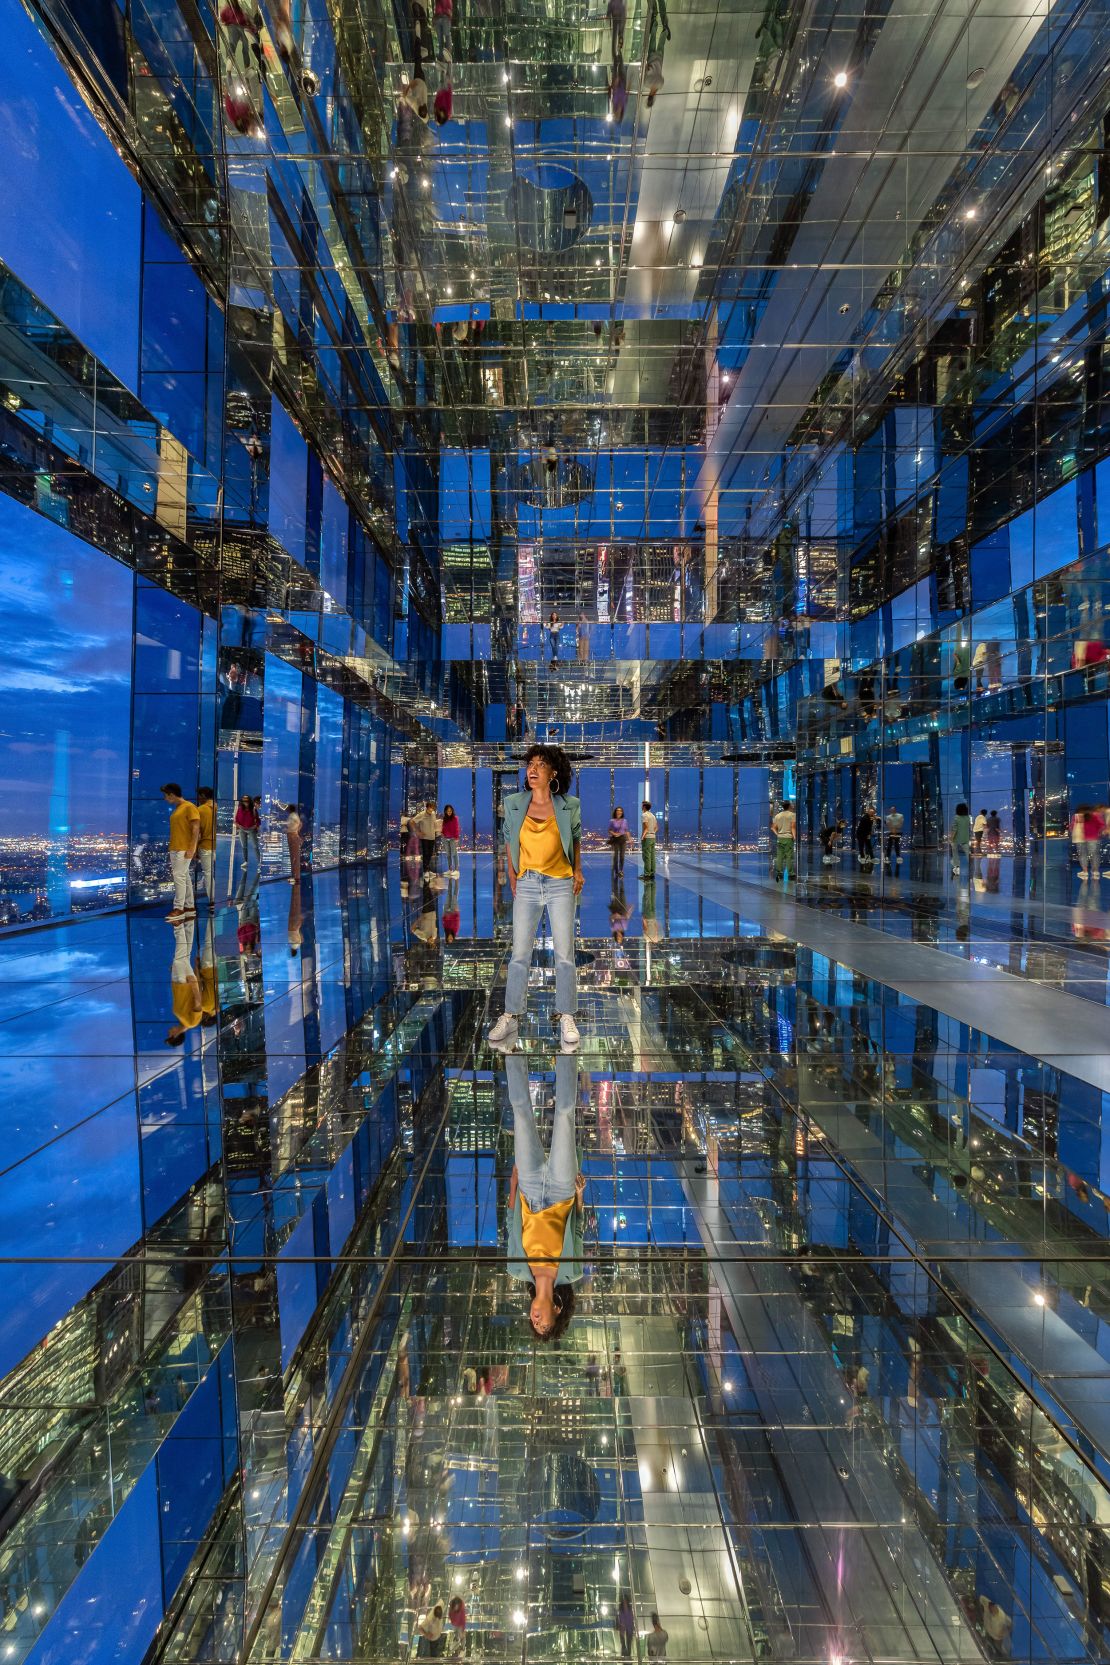 The "world's most immersive observatory experience," features an art installation with a mirrored room.